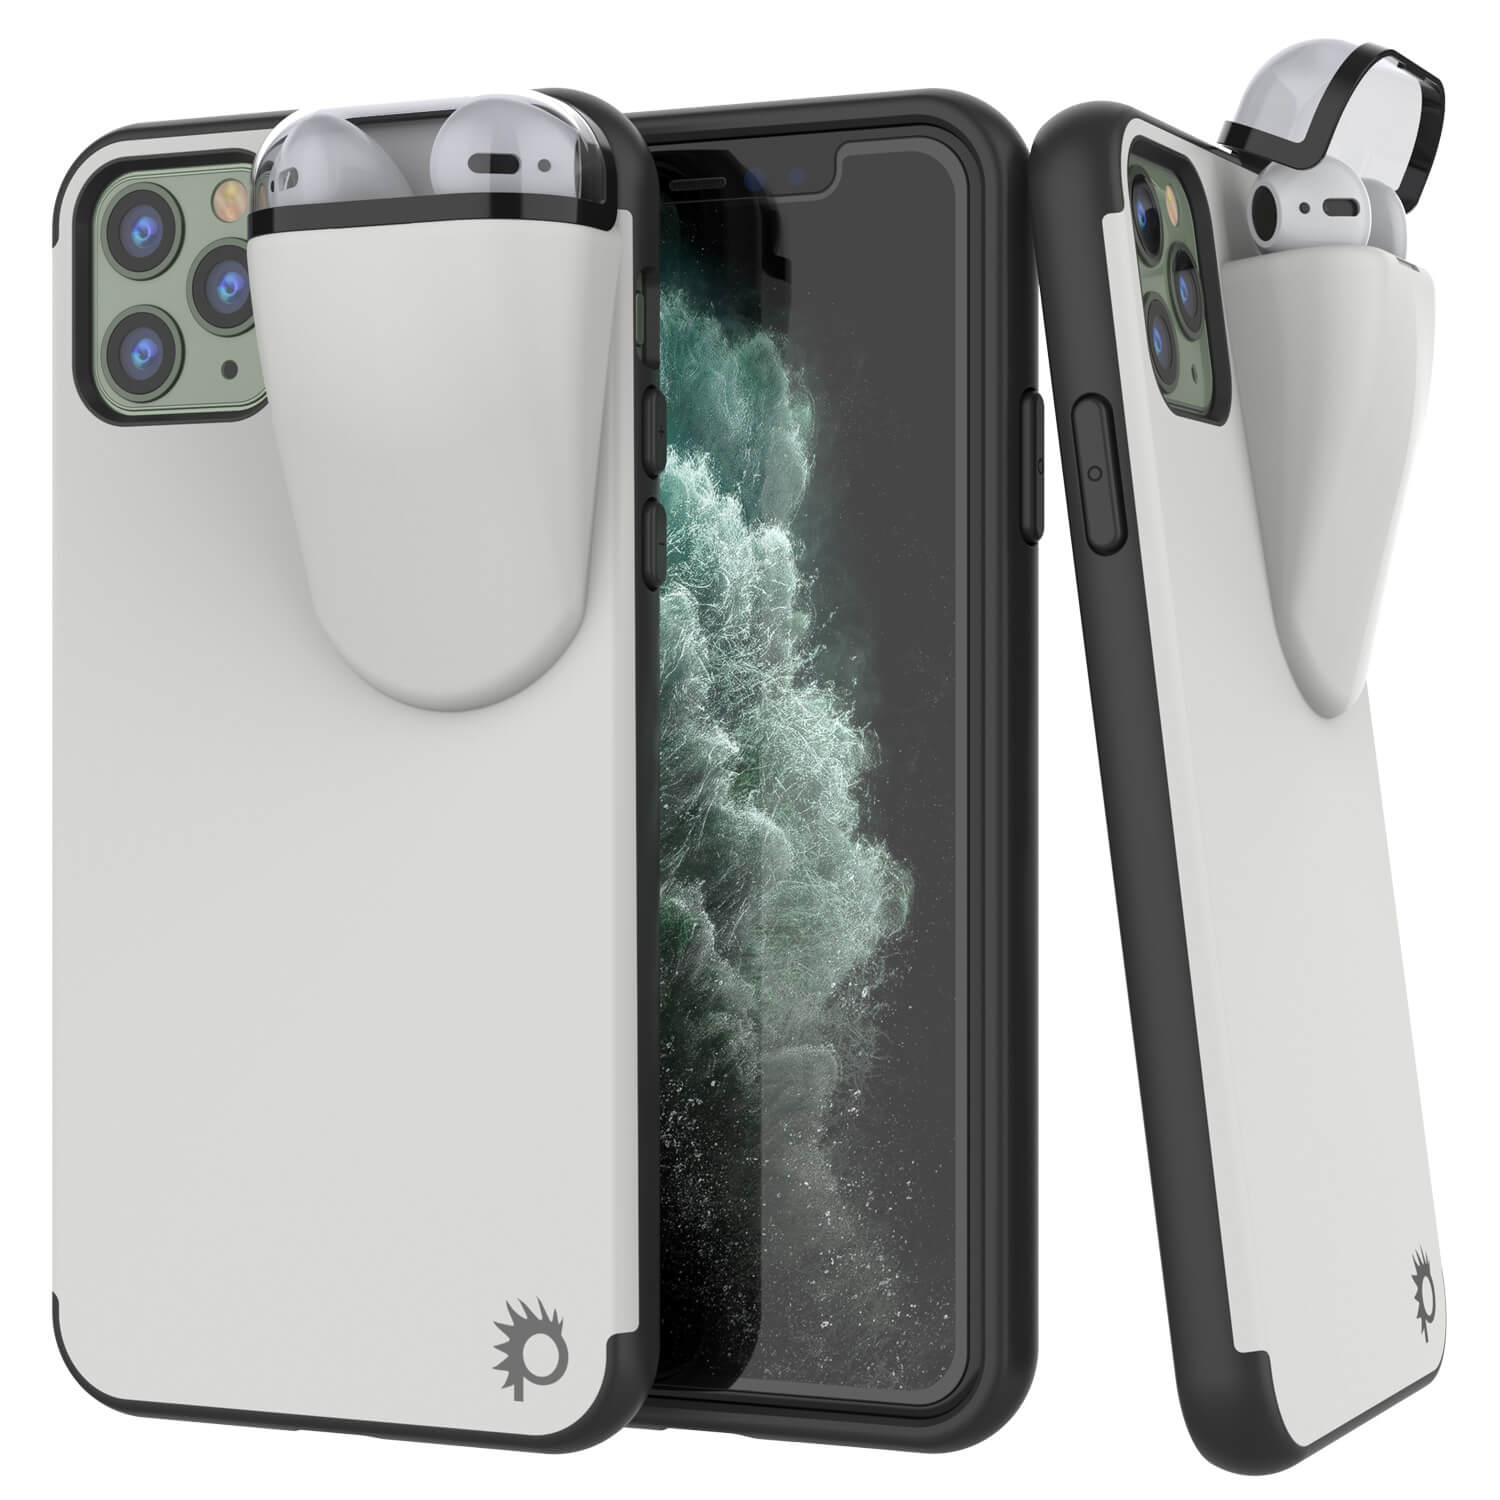 Pin on Airpod Case Covers